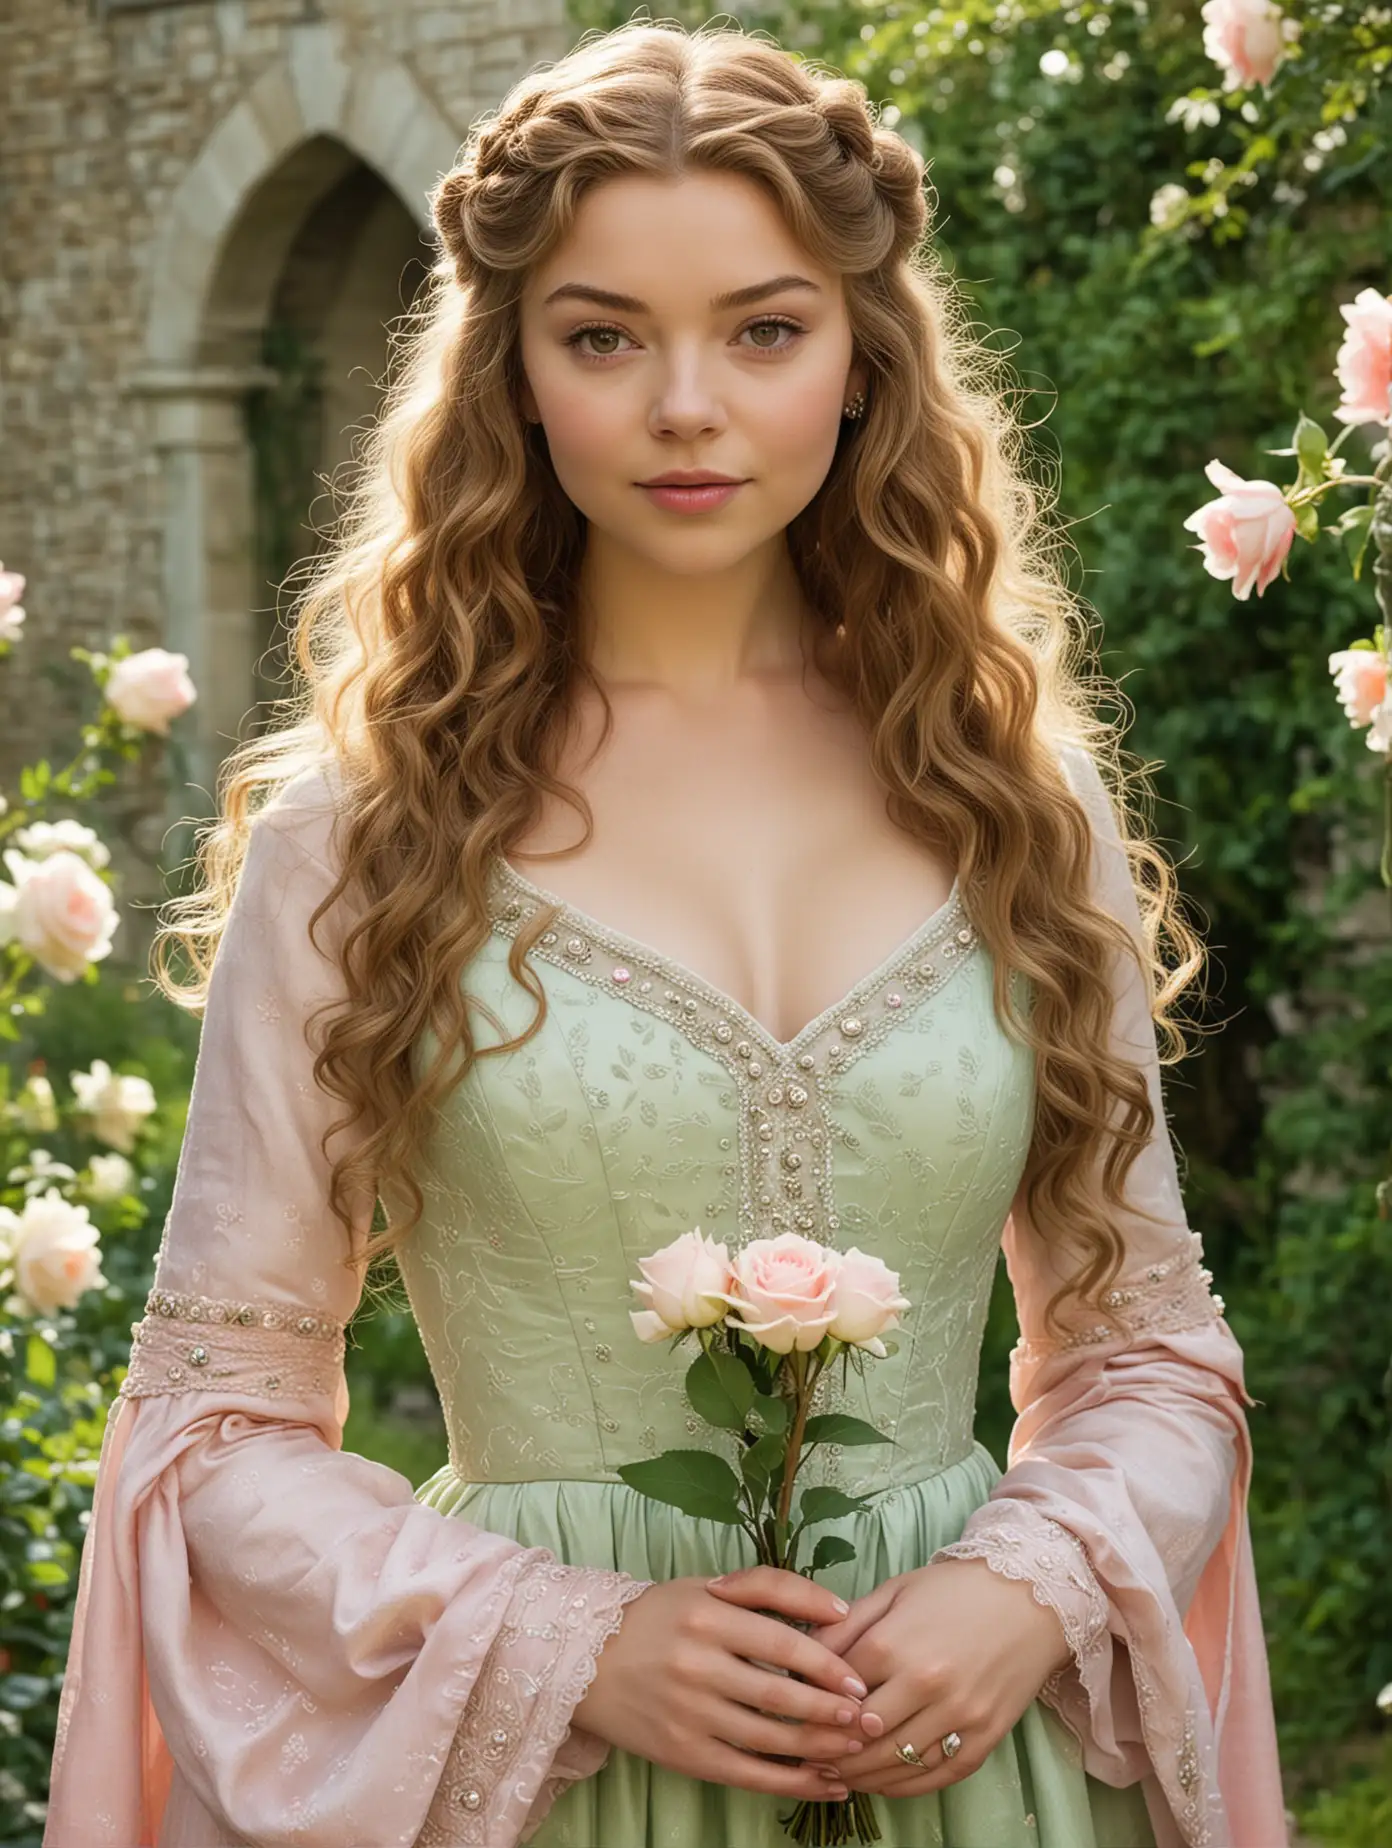 Young Girl Margaery Tyrell Holding Roses in Medieval Garden